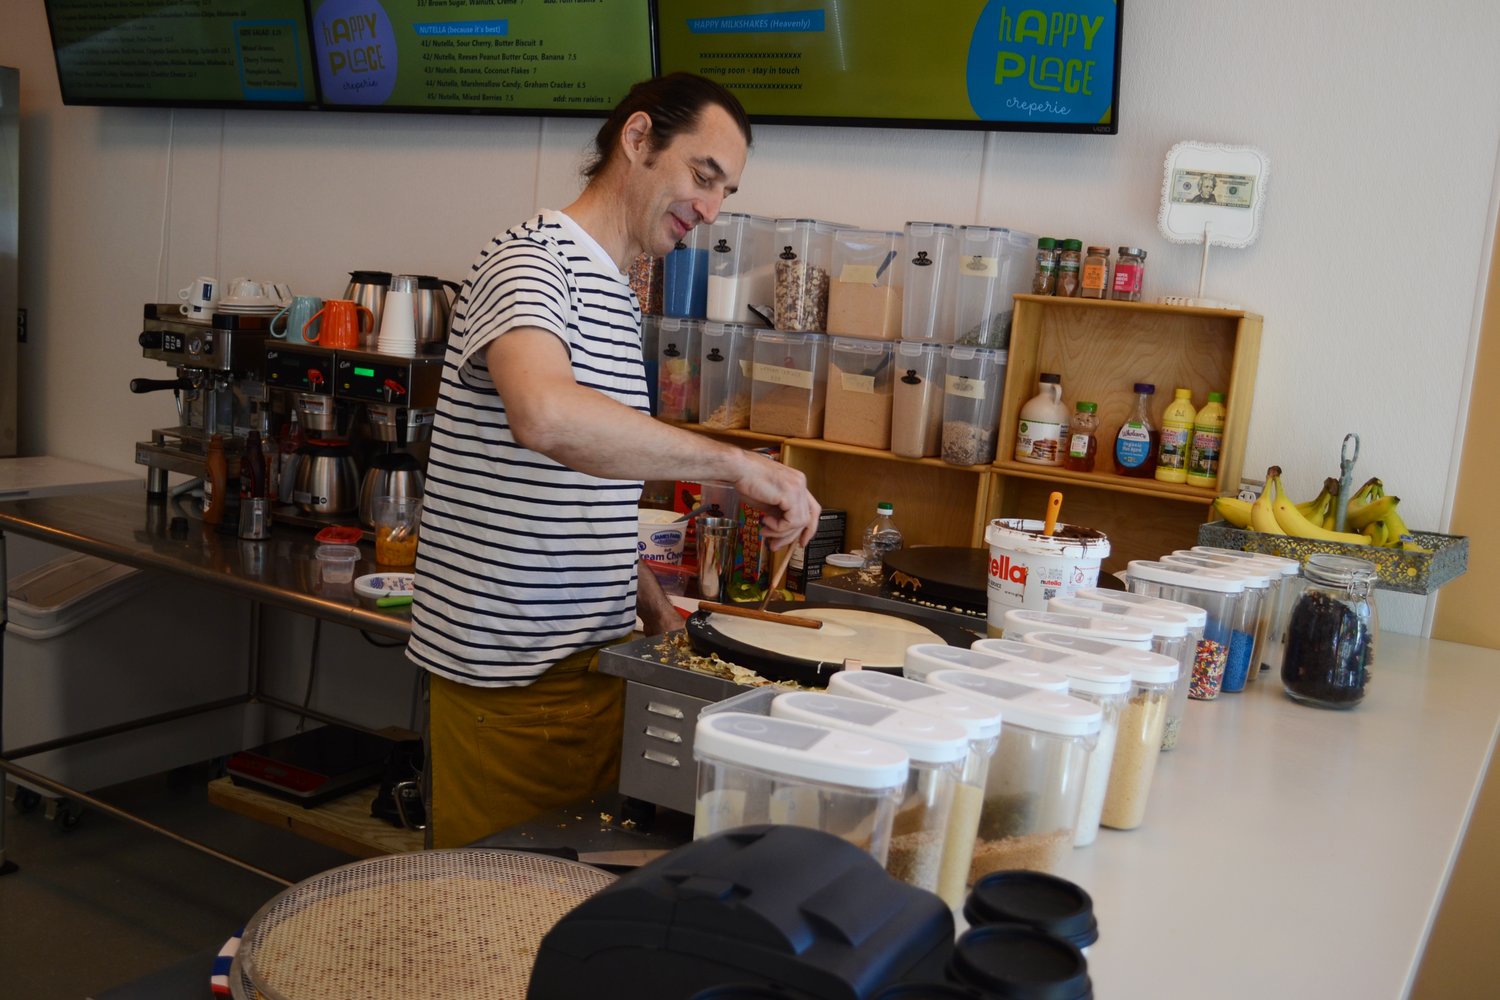 Aleksandar Janjic spreads batter onto one of the crepe griddles at Happy Place Creperie, located at 438 Main St. in Warren. The shop opened in August and serves up a wide variety of sweet and savory crepes.